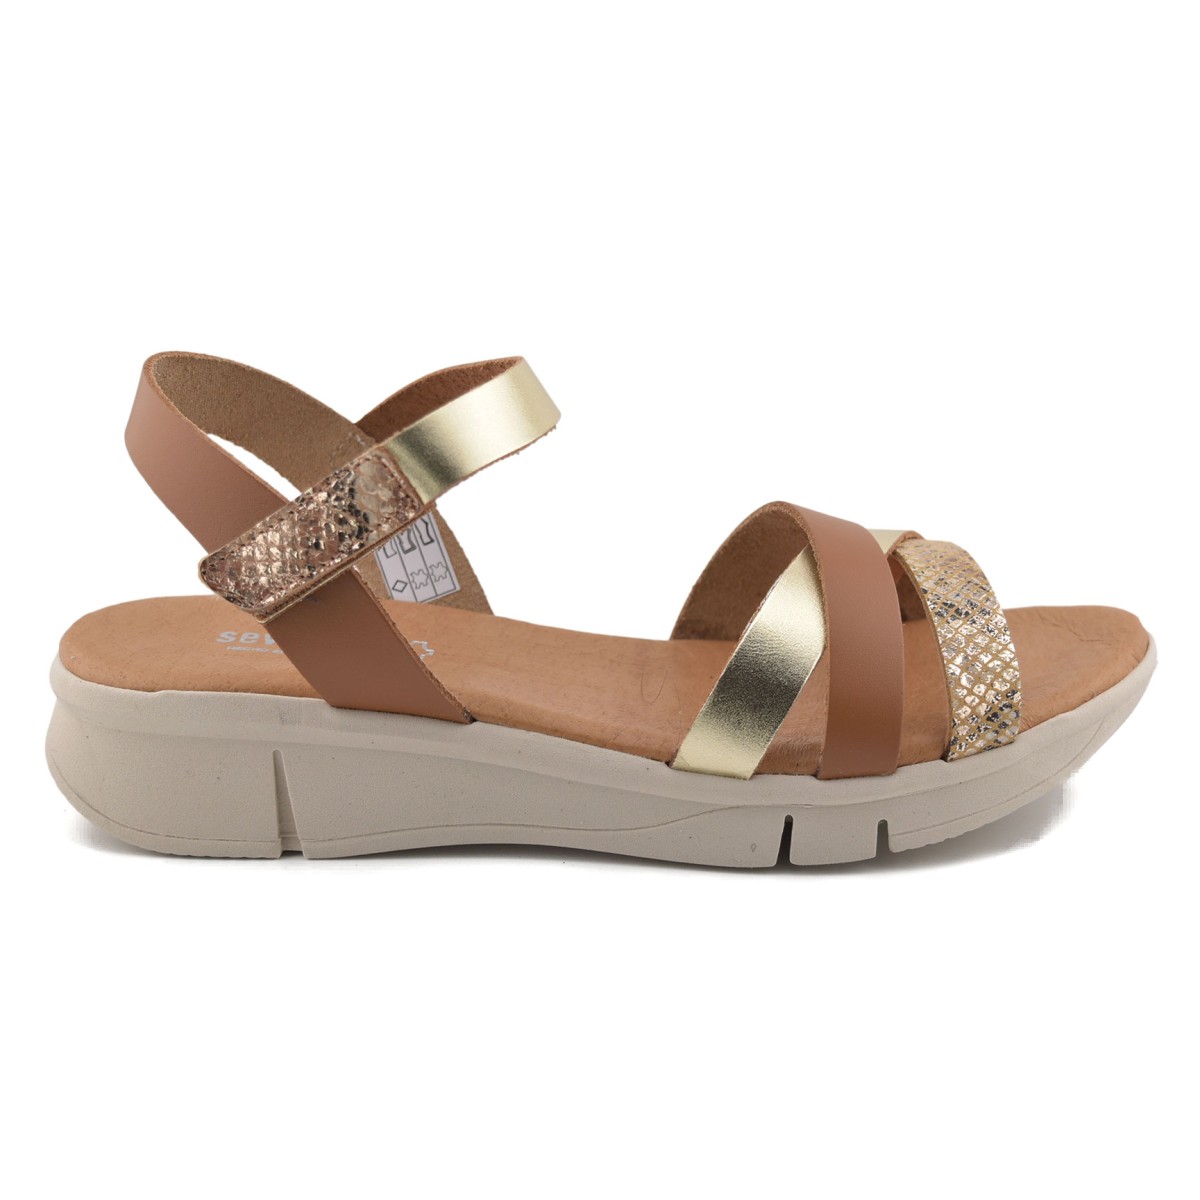 Brown and gold leather sandals by CBP